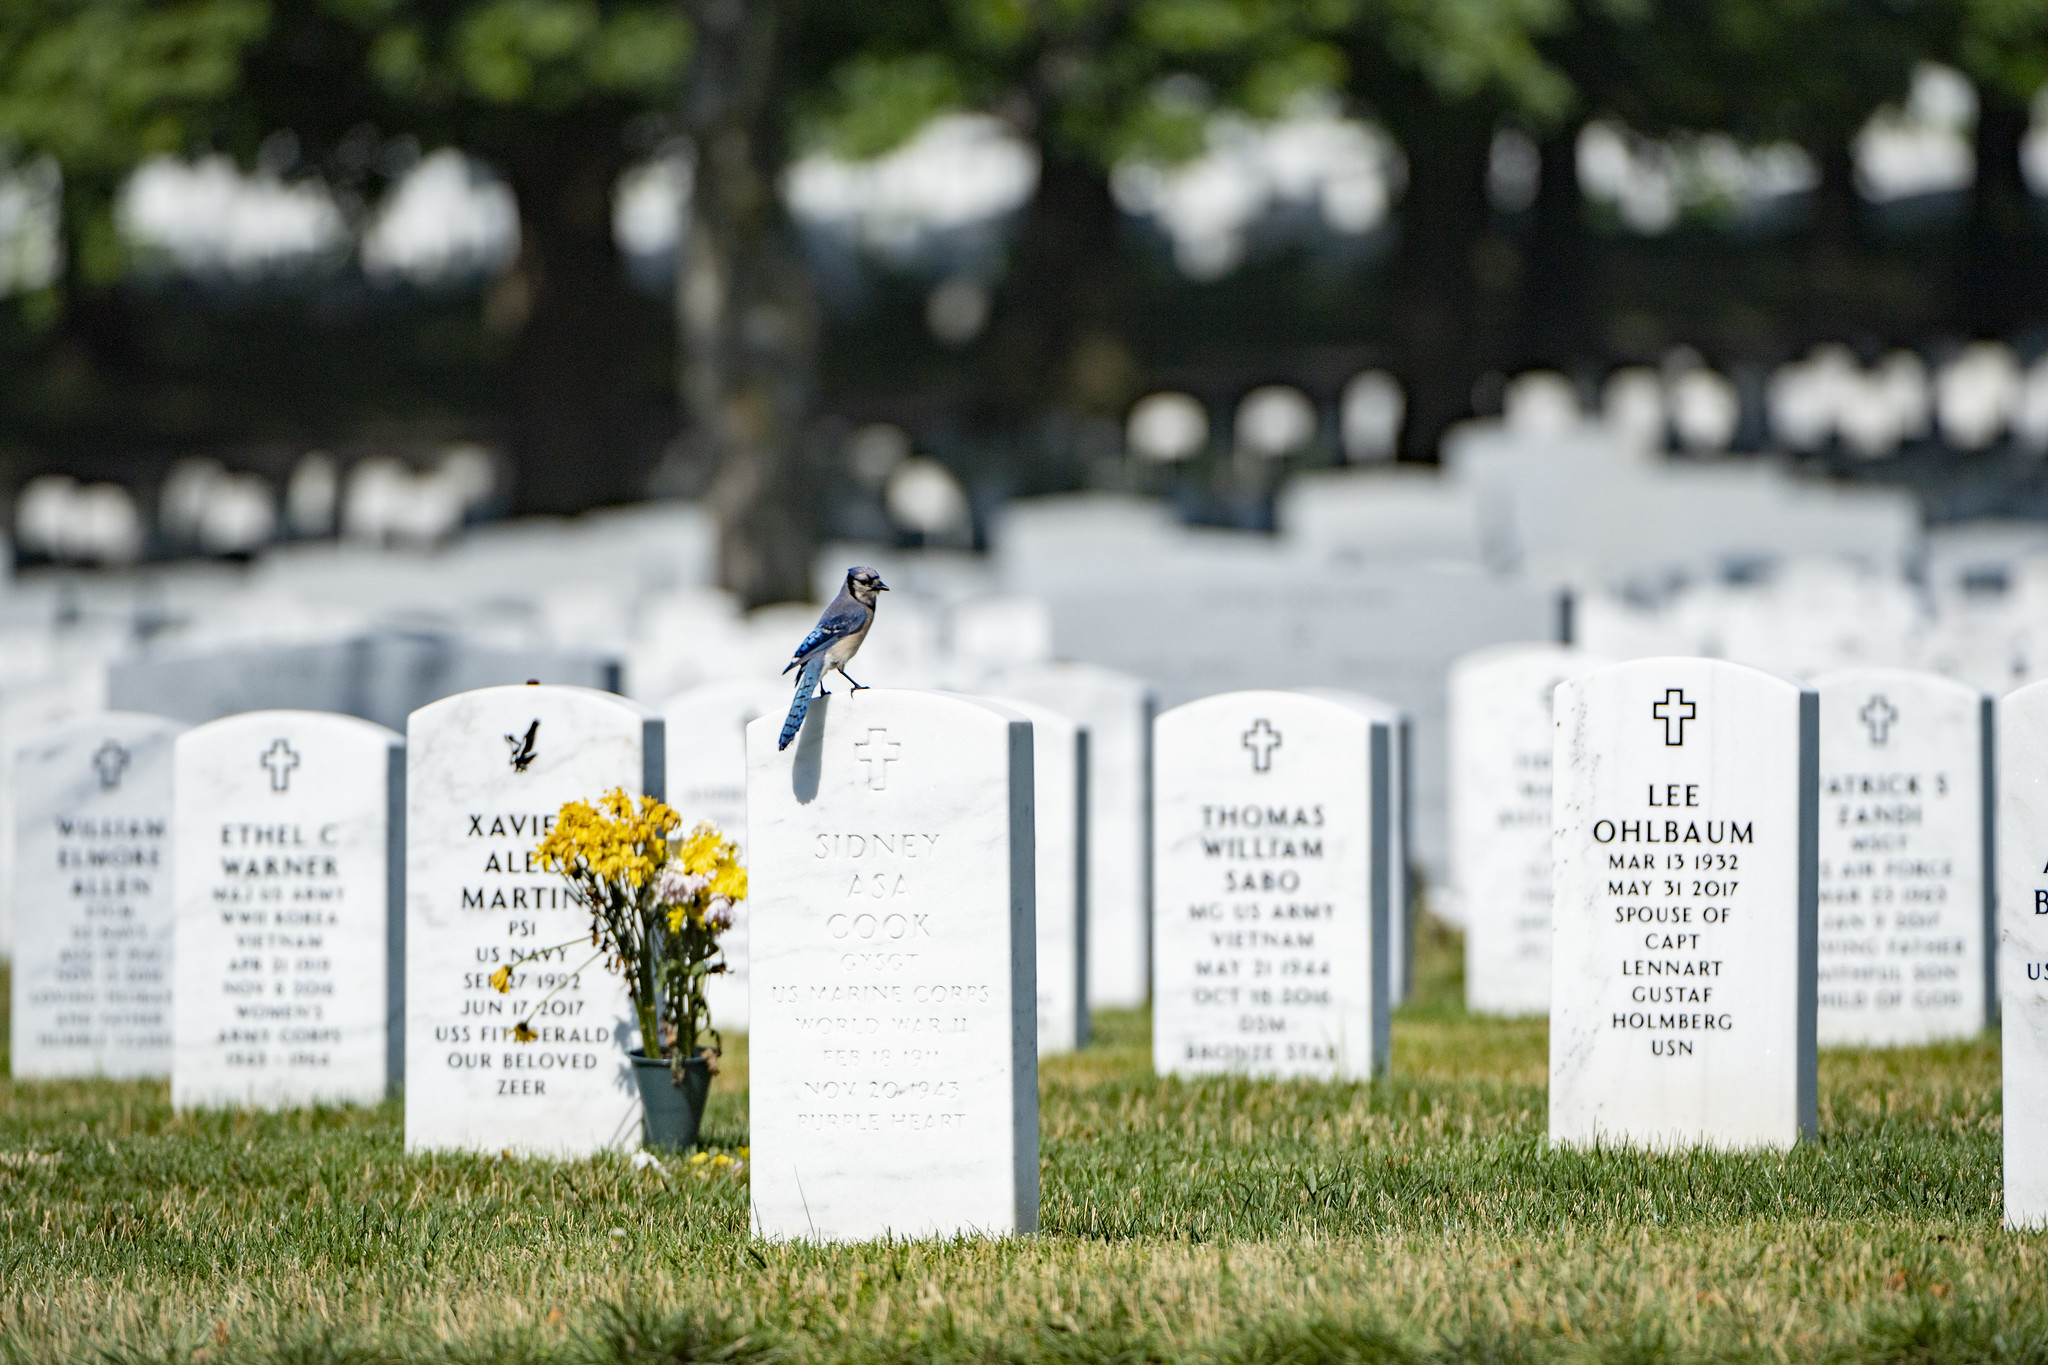 Bluejay sitting on headstone in section 60 of Arlington National Cemetery